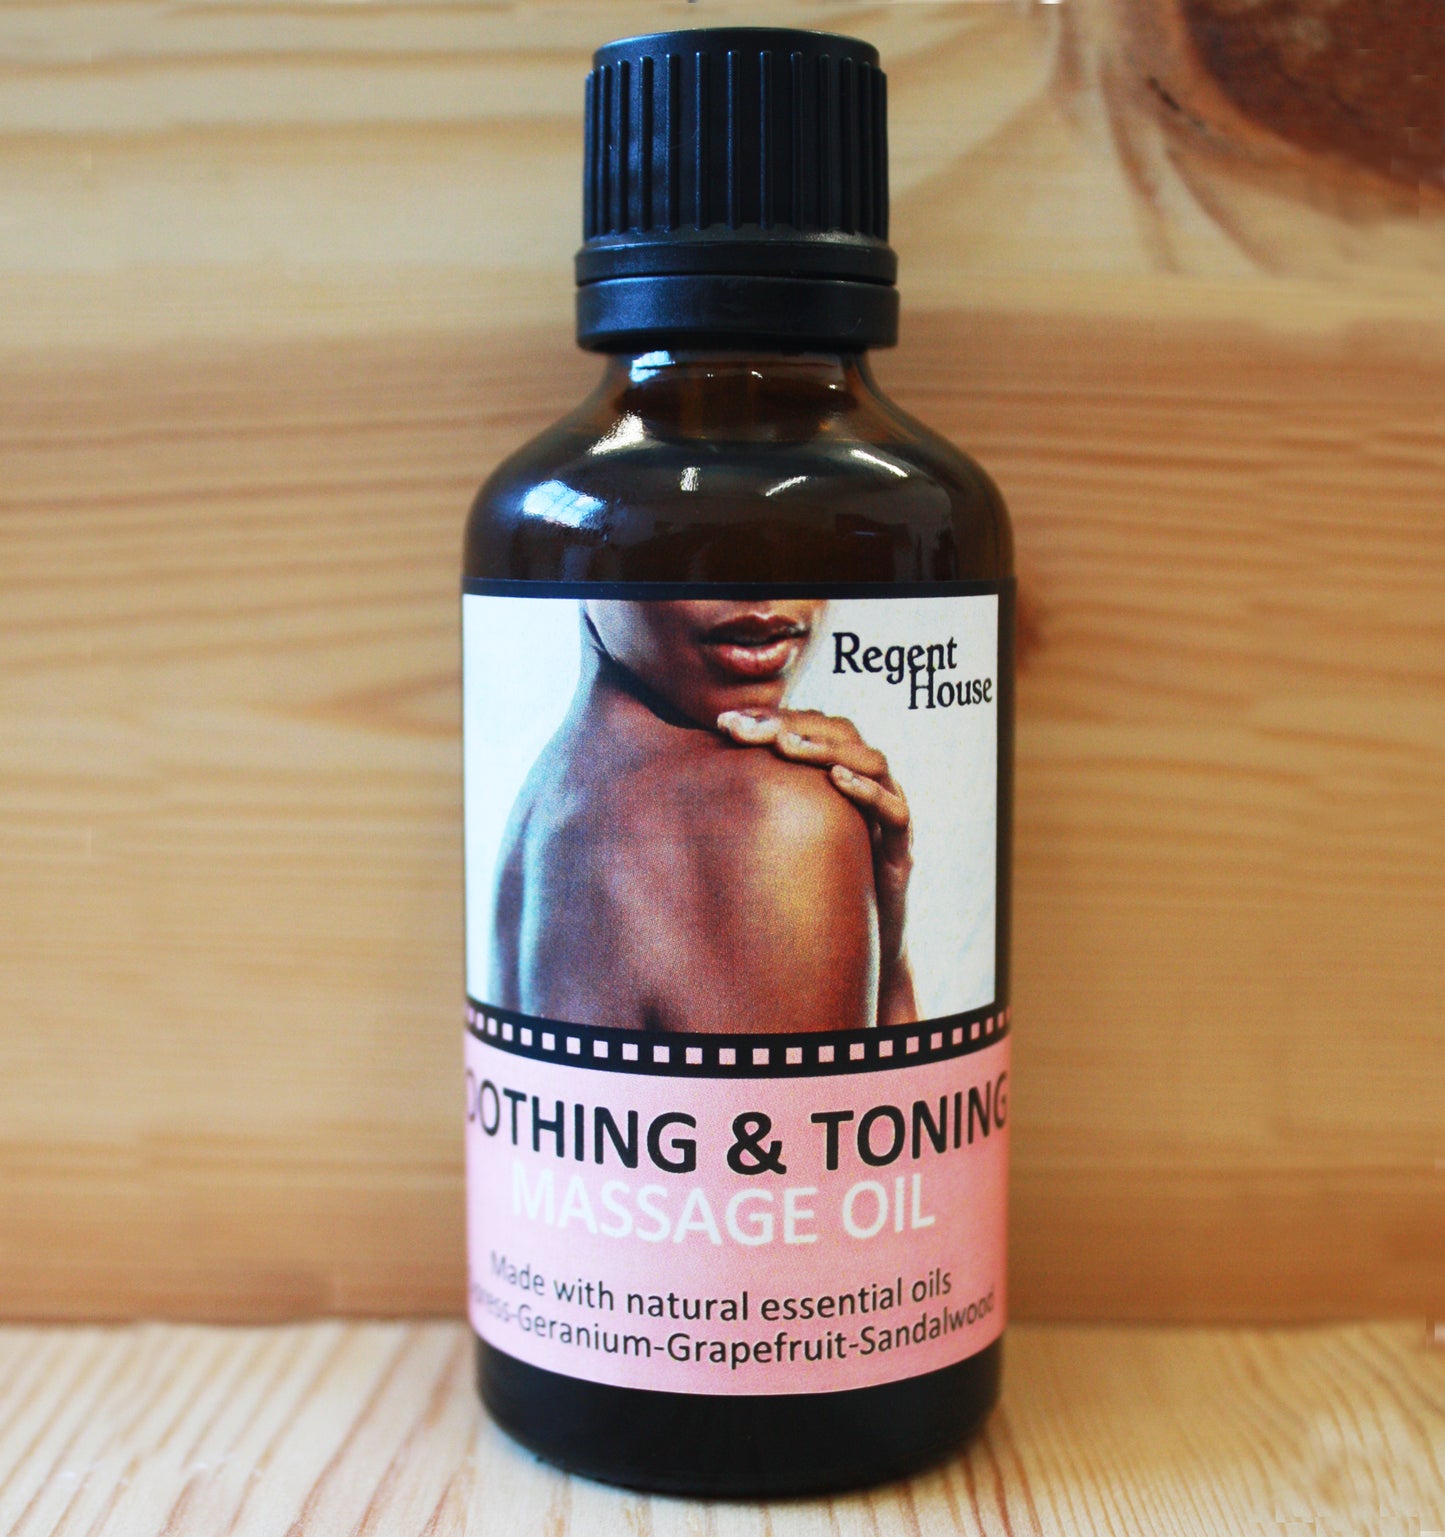 Soothing & Toning Massage Oil